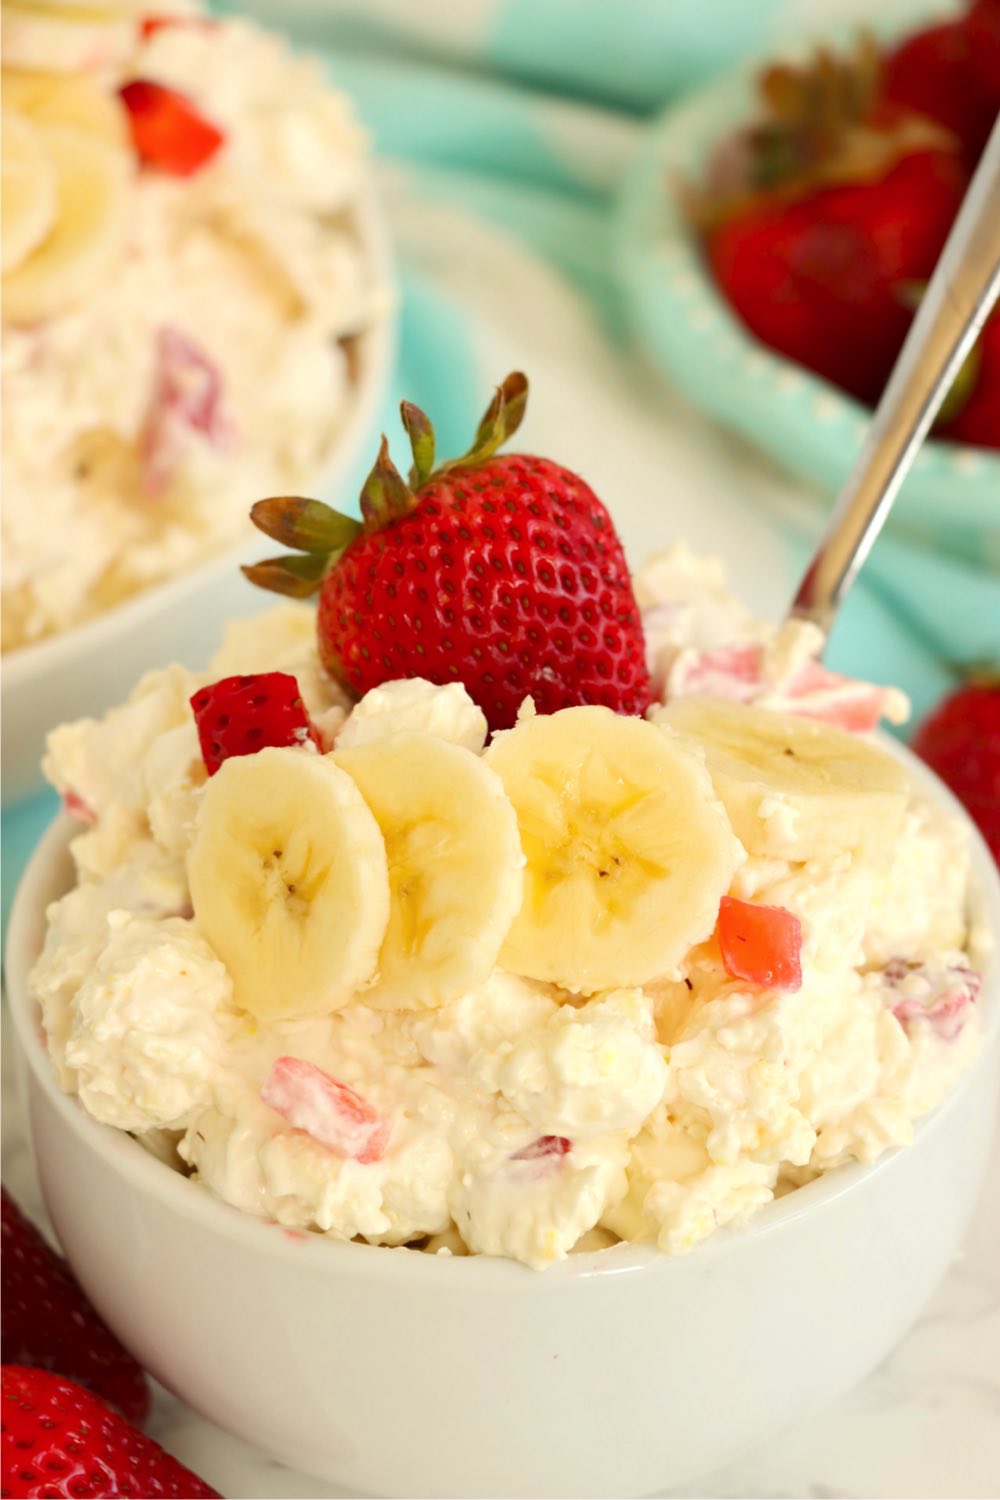 A white bowl filled with a fluff salad and garnished with bananas and a strawberry.